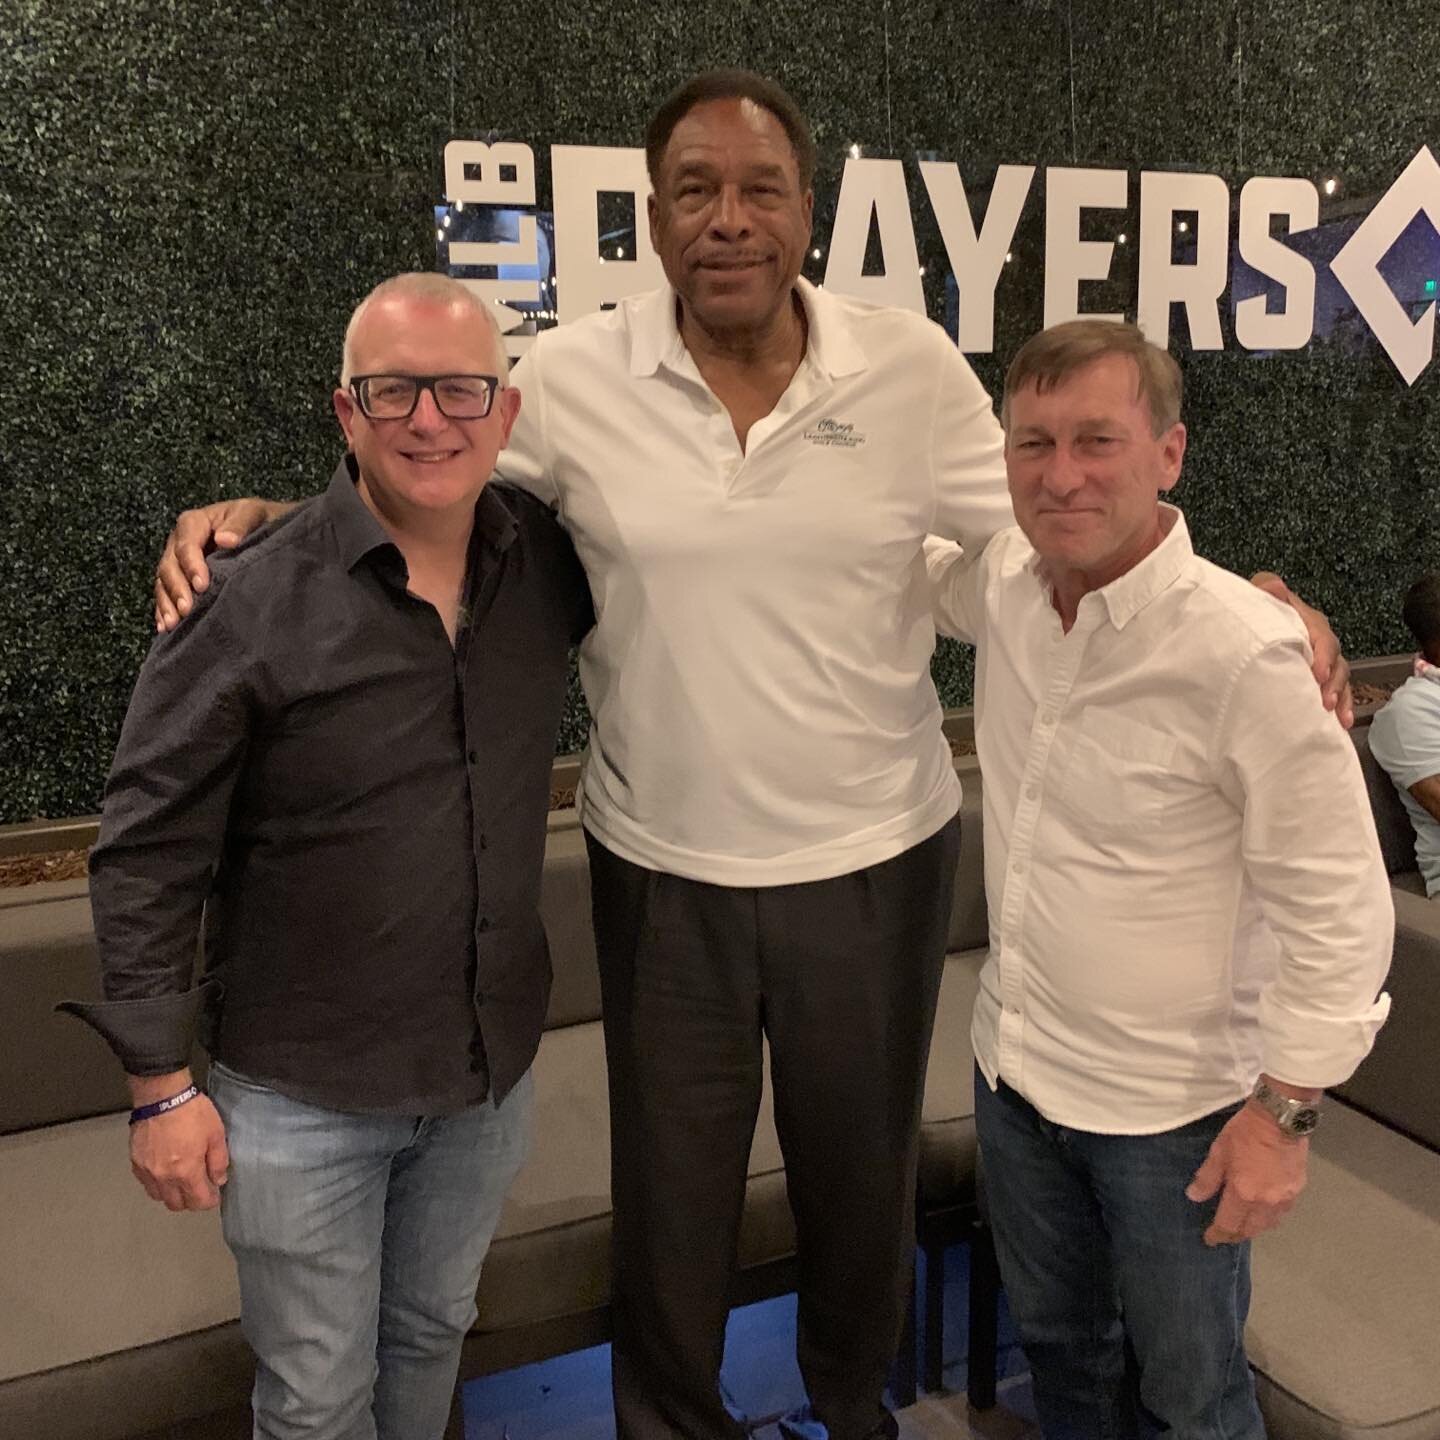 Todd and I have been honored to have worked with Dave Winfield over recent years. He is a true giant of a man-his size aside @toddradom #allstargame #hof